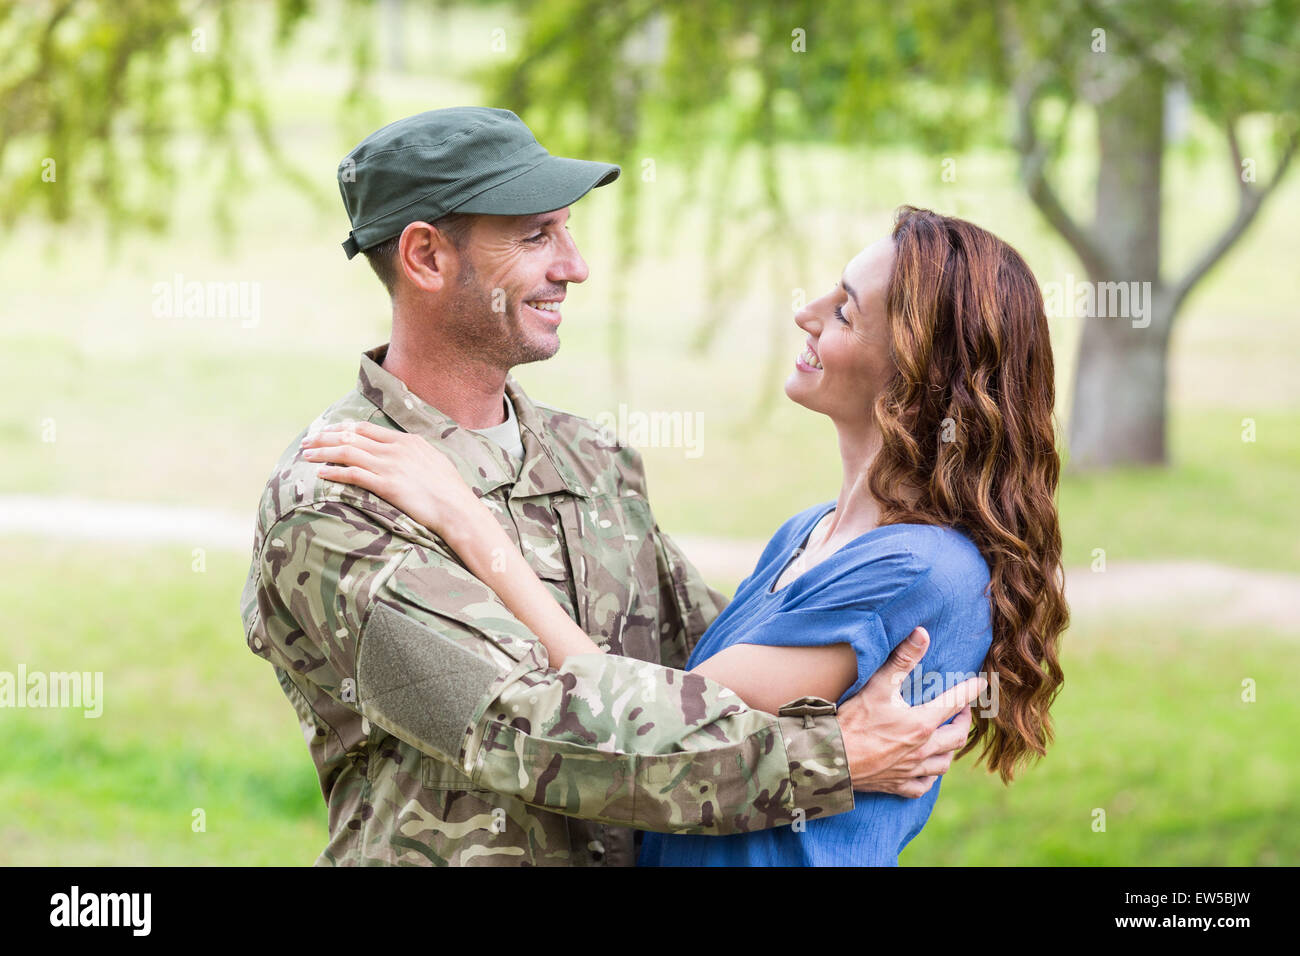 Handsome soldier reunited with partner Stock Photo